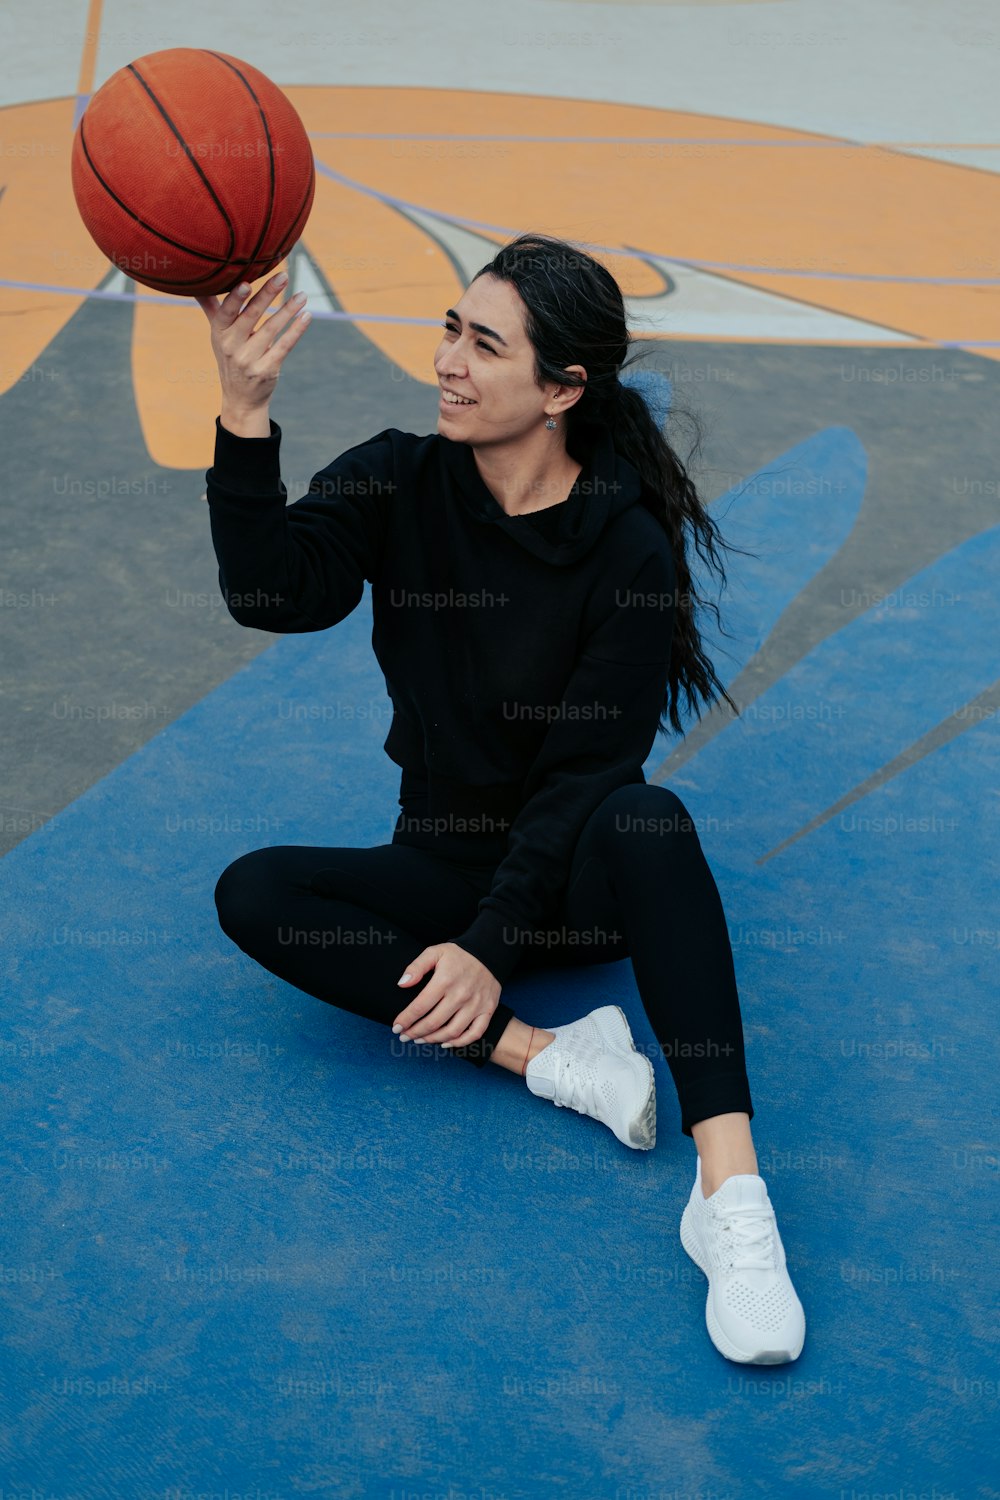 a woman sitting on the ground holding a basketball